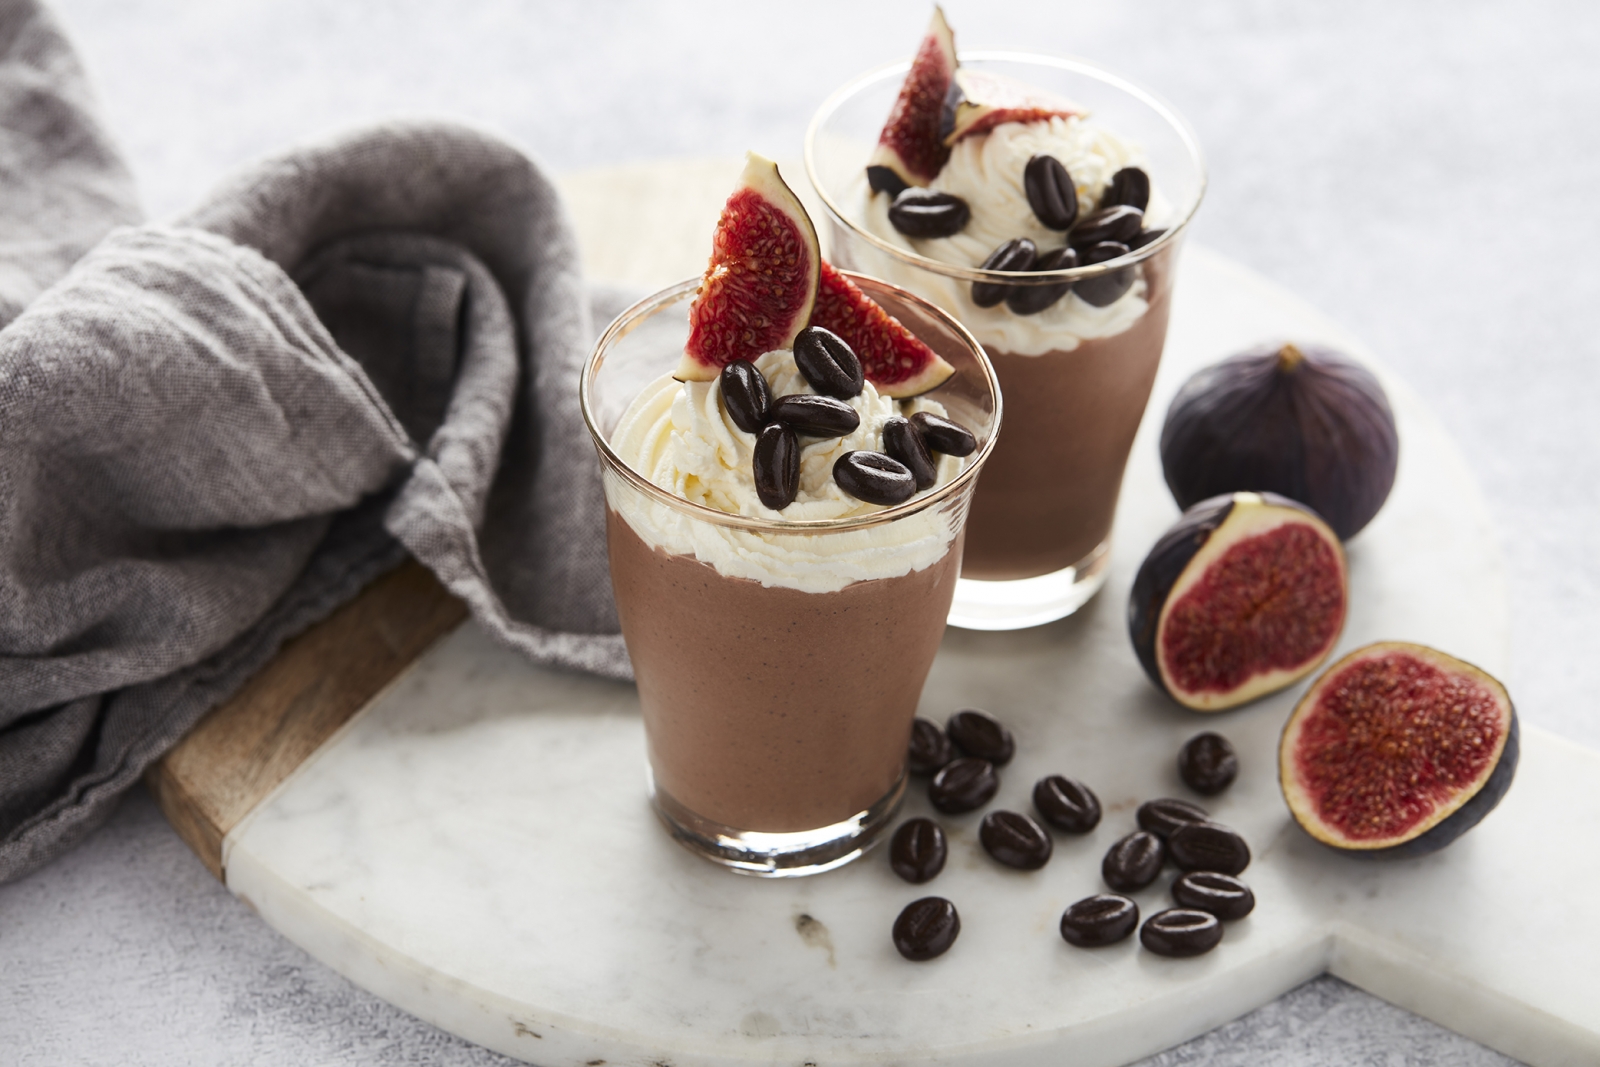 Keto Espresso Mousse from the Keto Party eBook